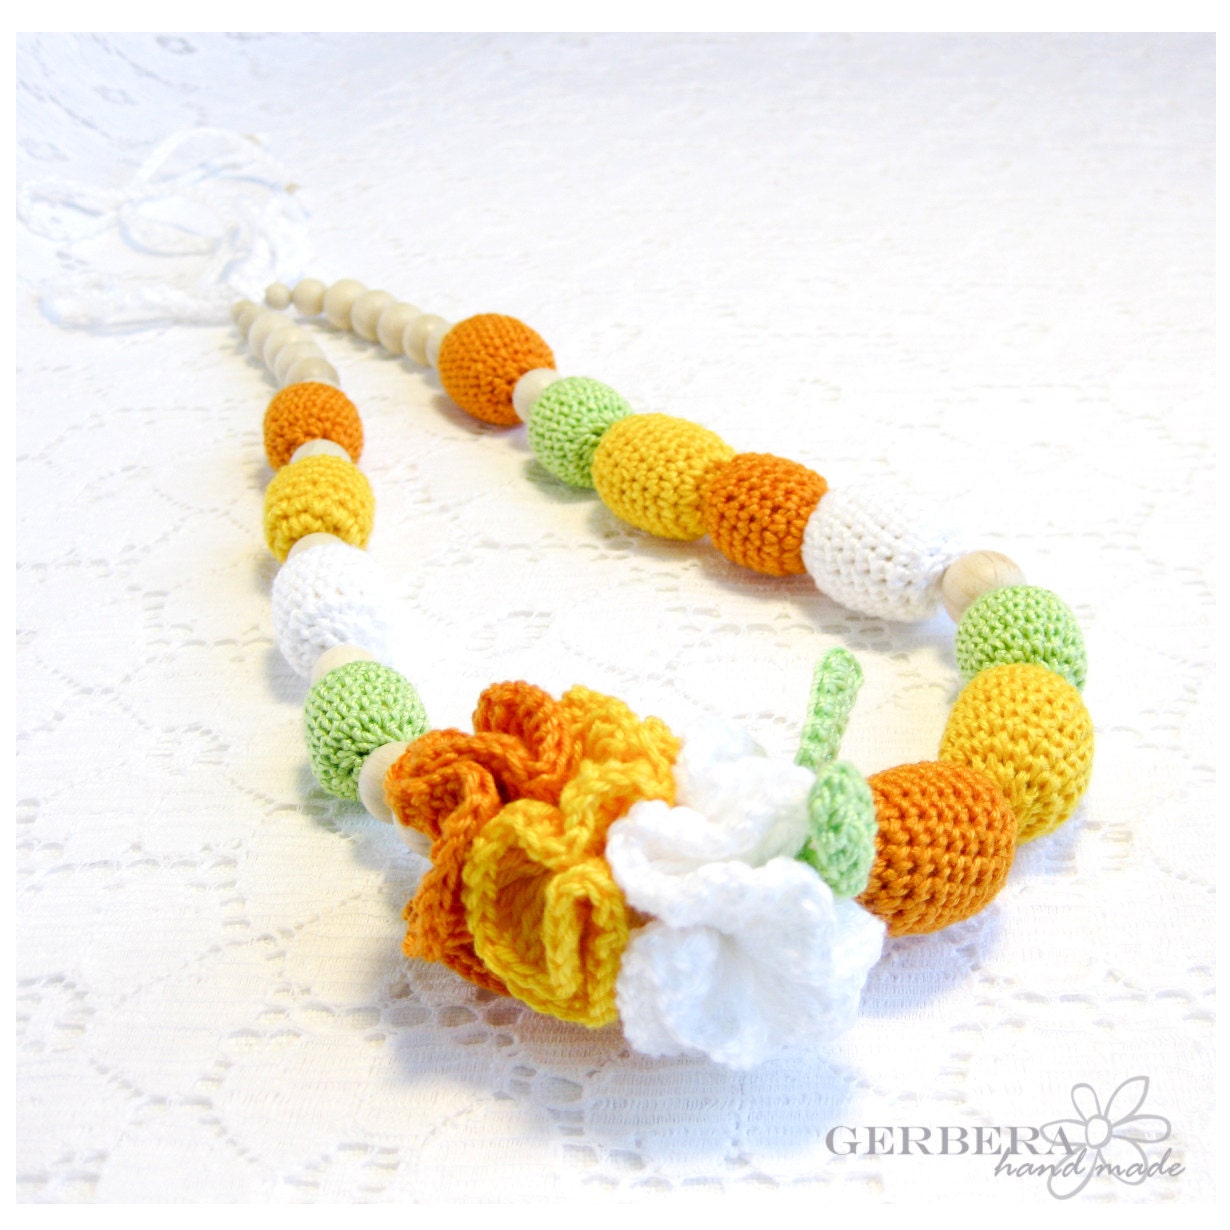 Nursing necklace & autumn breastfeeding toy for Mommy to Wear and baby - yellow orange green READY TO SHIP - GerberaHandmade